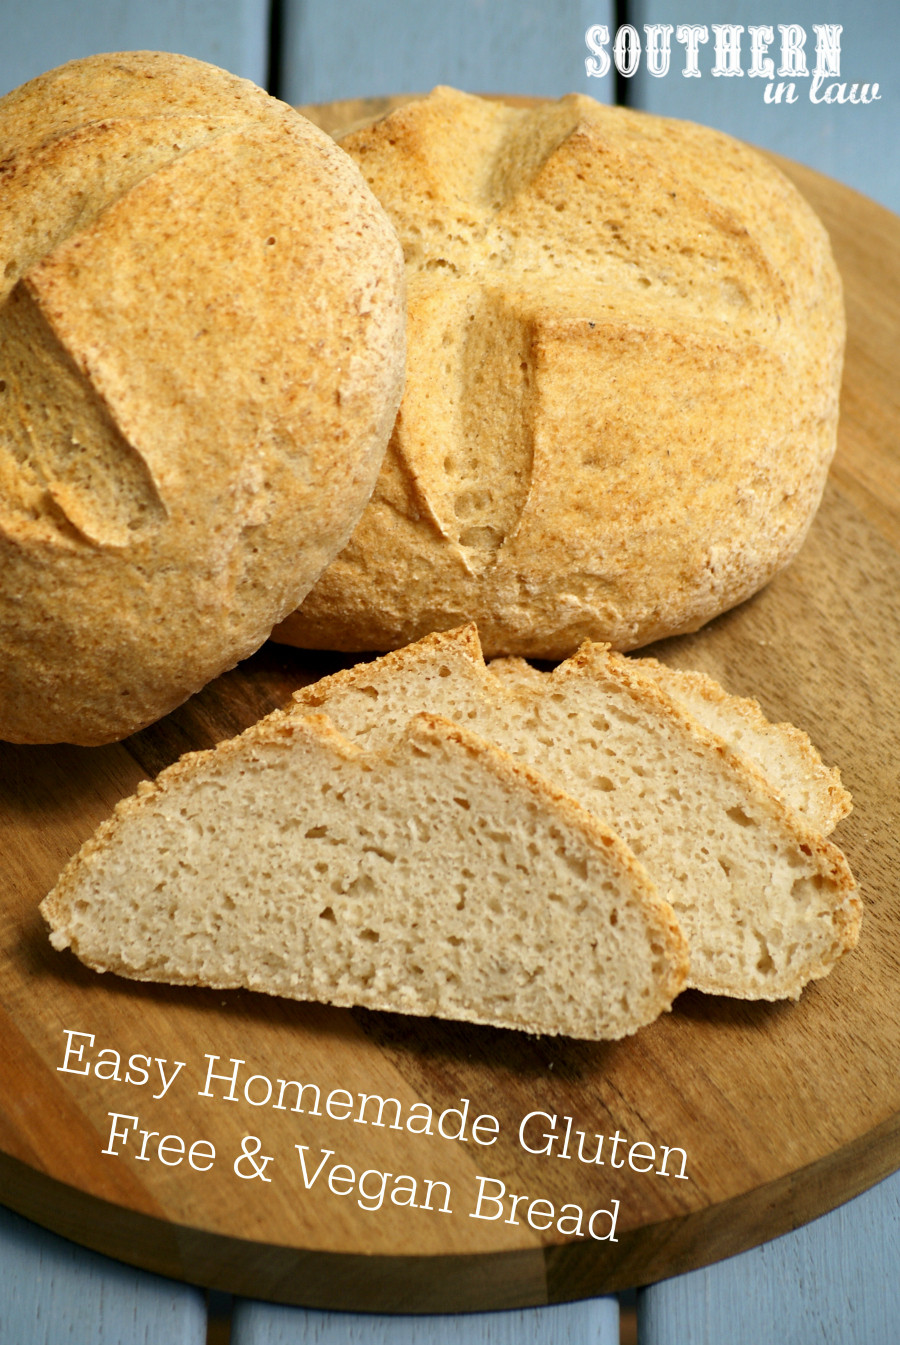 Easy Gluten Free Breads Recipes
 Southern In Law Recipe Easy Homemade Gluten Free and